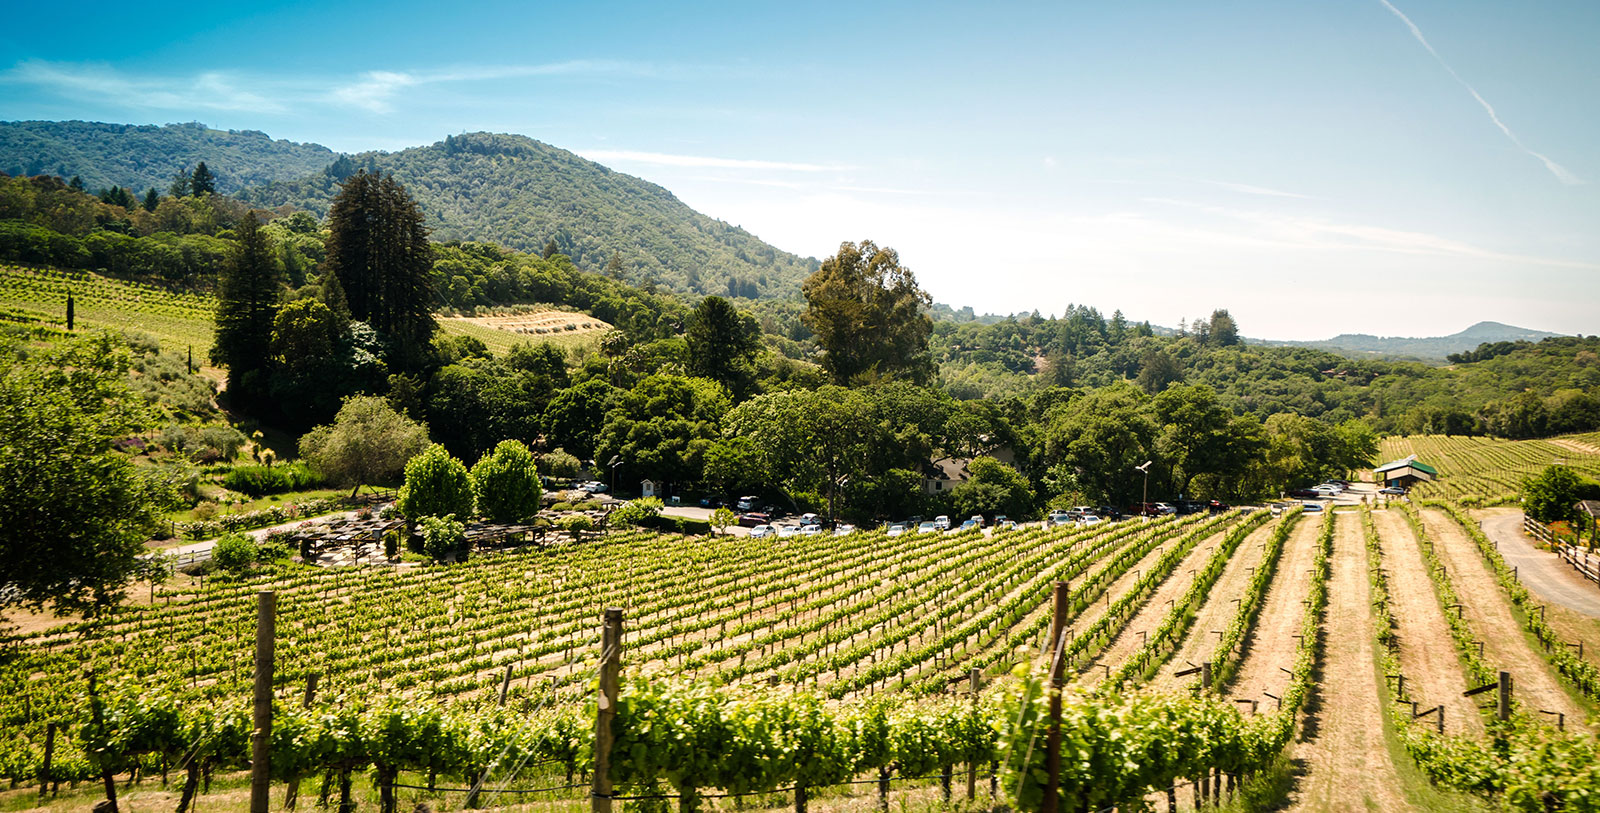 Experience a wine tour through the gorgeous Sonoma County wine country with the hotel's tour partner, Platypus Tours.